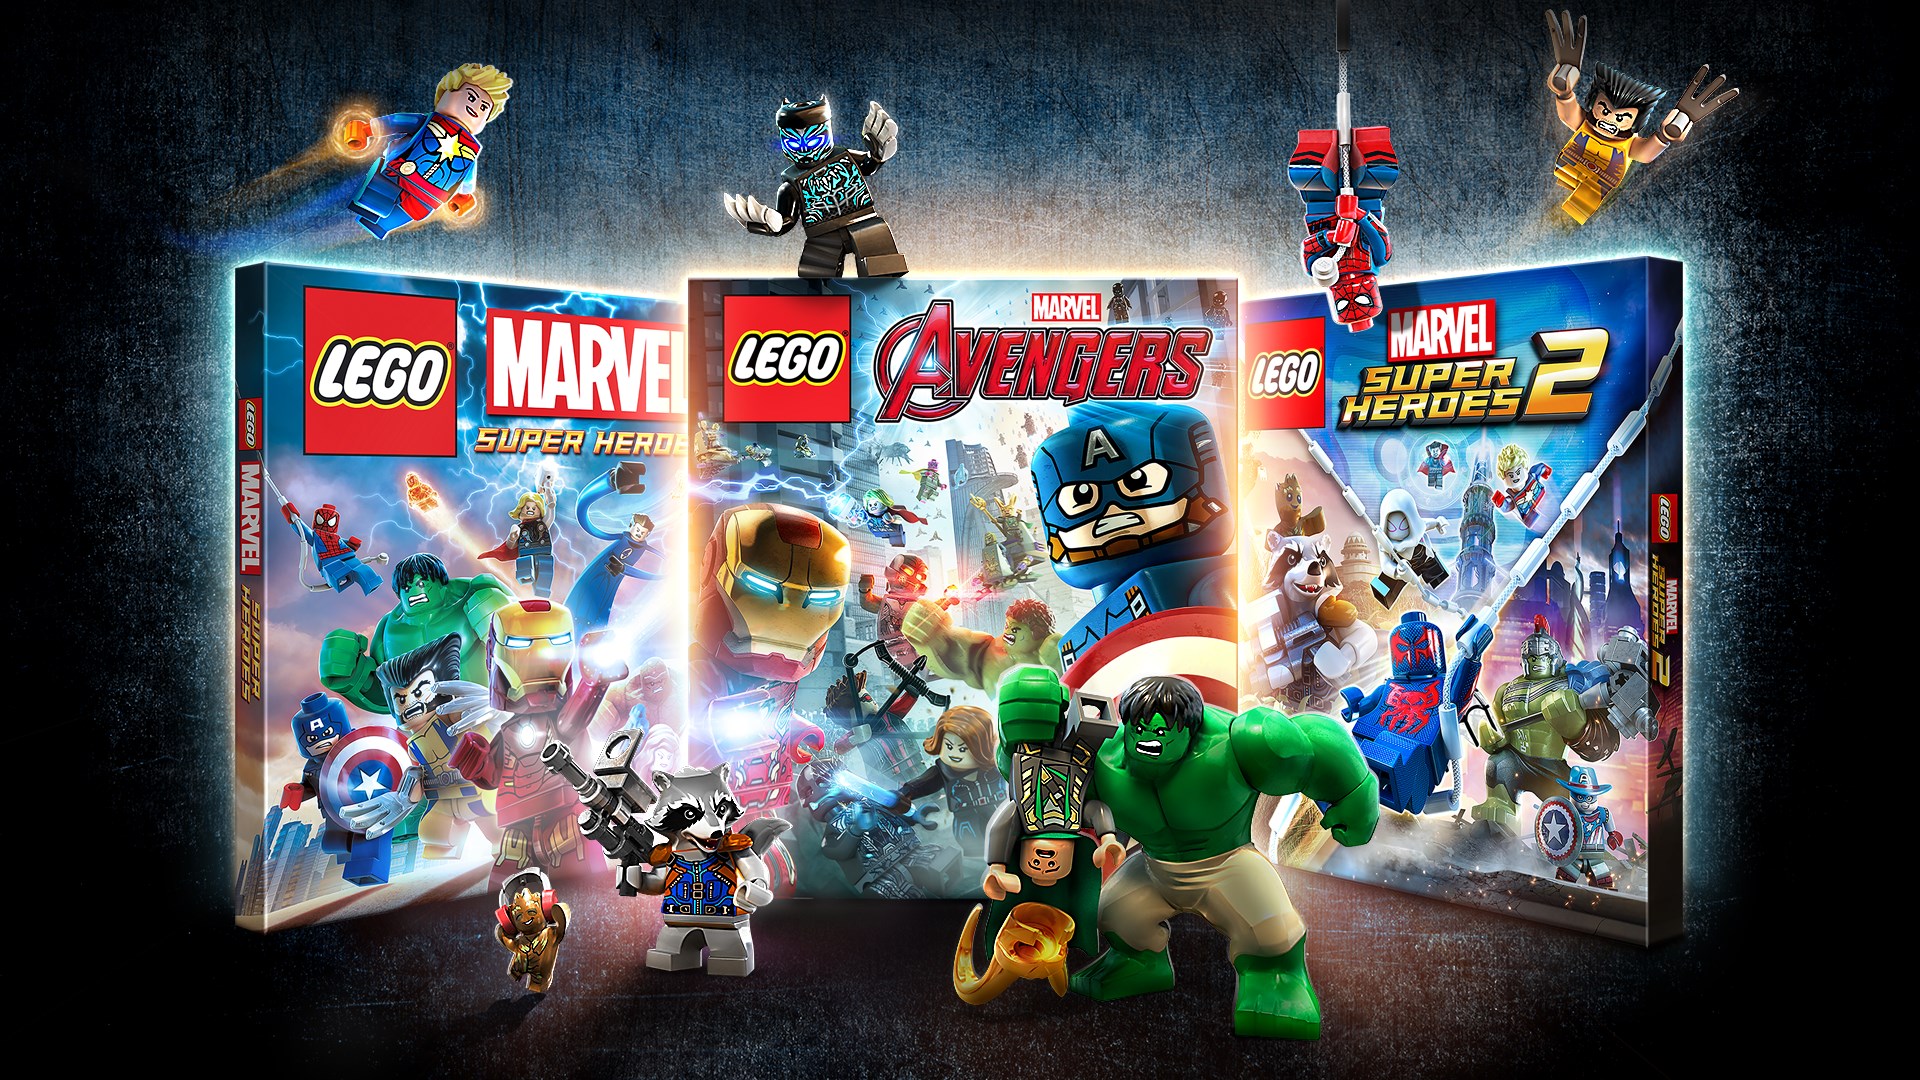 LEGO Marvel's Avengers Season Pass and downloadable add-ons detailed